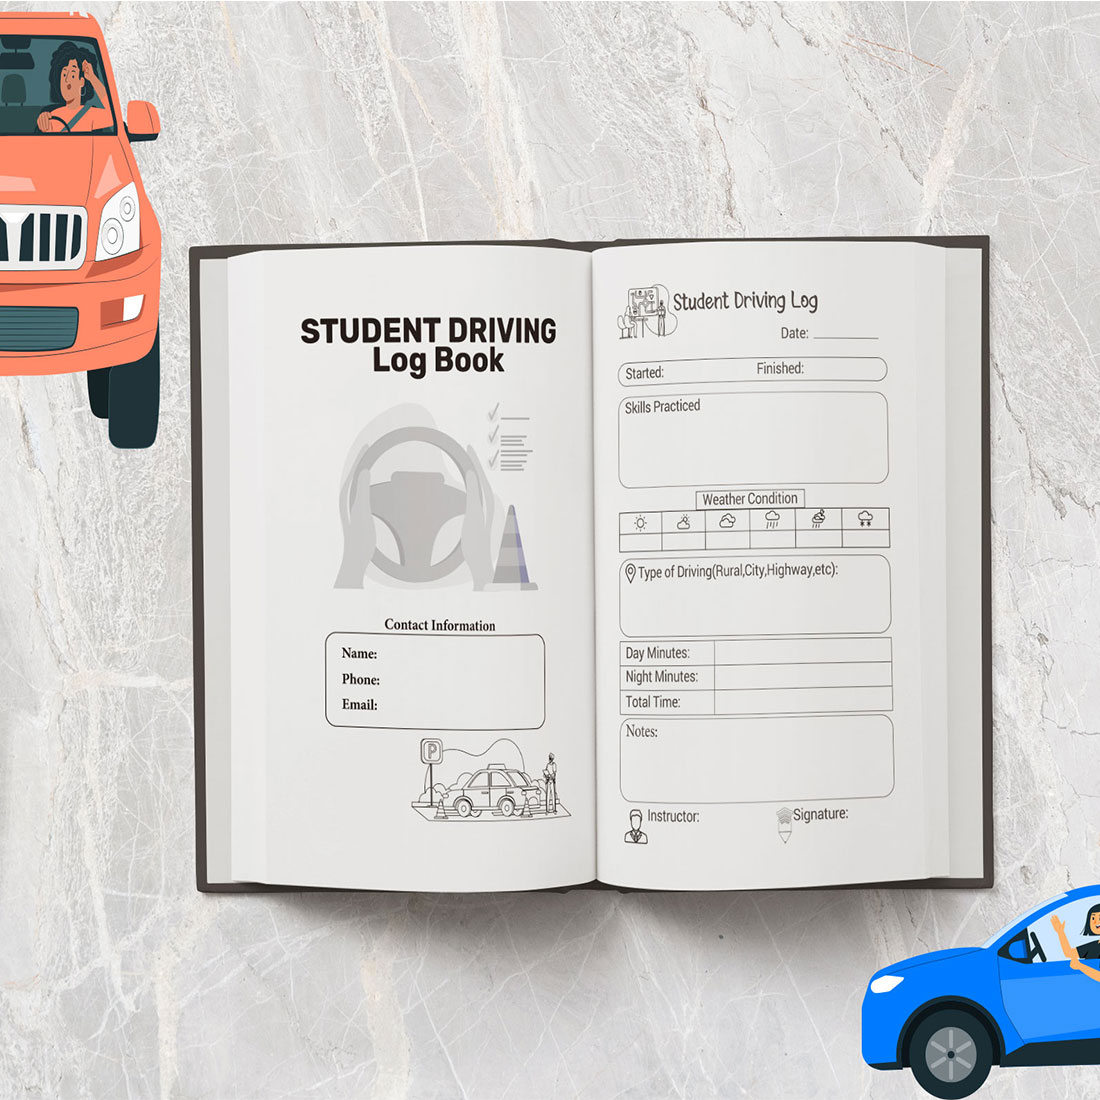 STUDENT DRIVING LOG BOOK preview image.